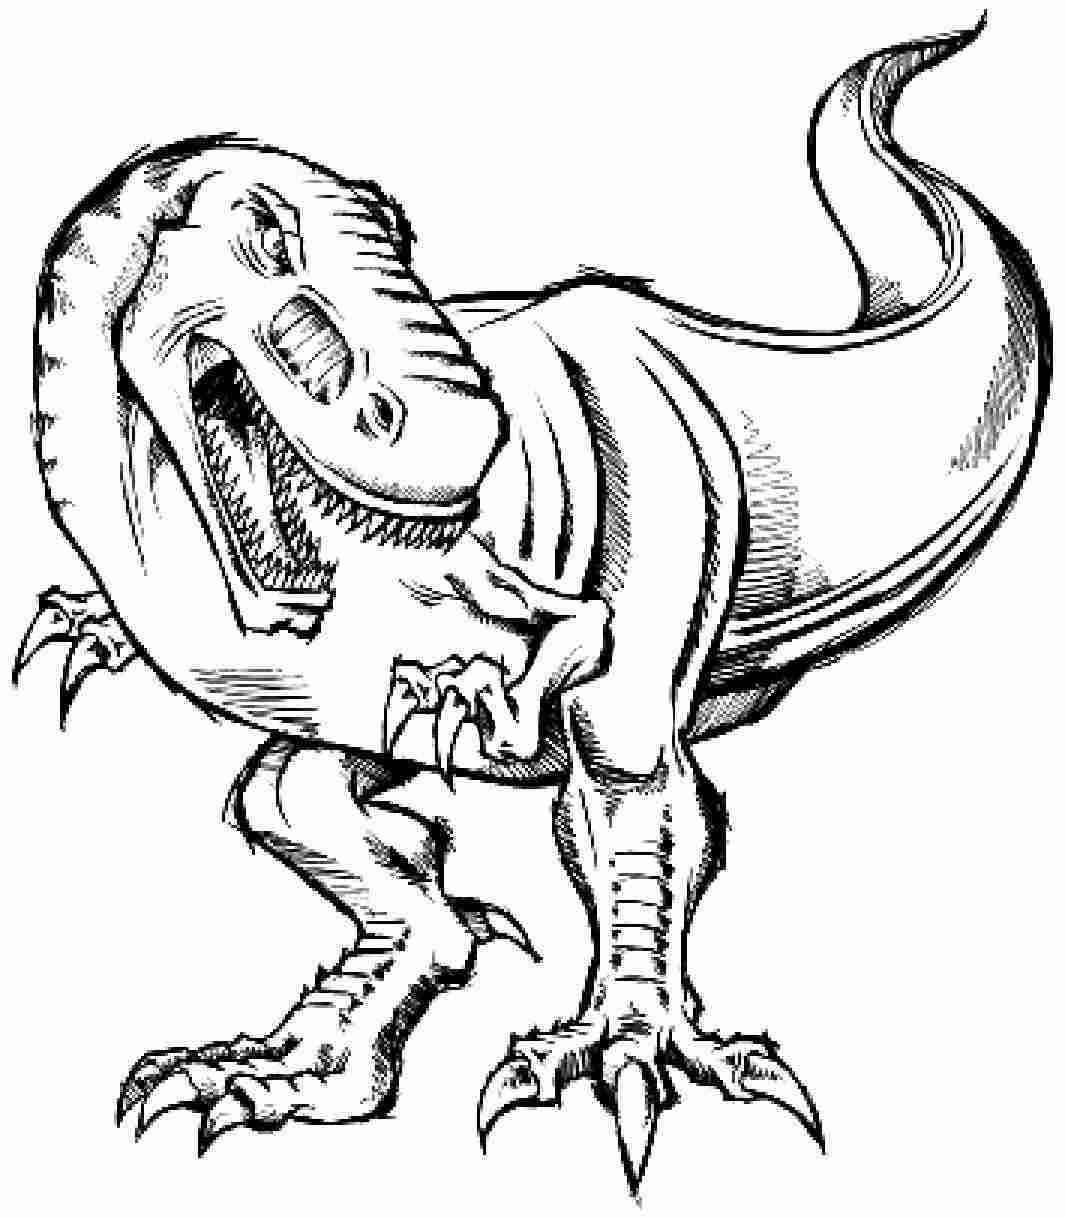 T Rex Dinosaur Coloring Pages At GetColorings Free Printable Colorings Pages To Print And